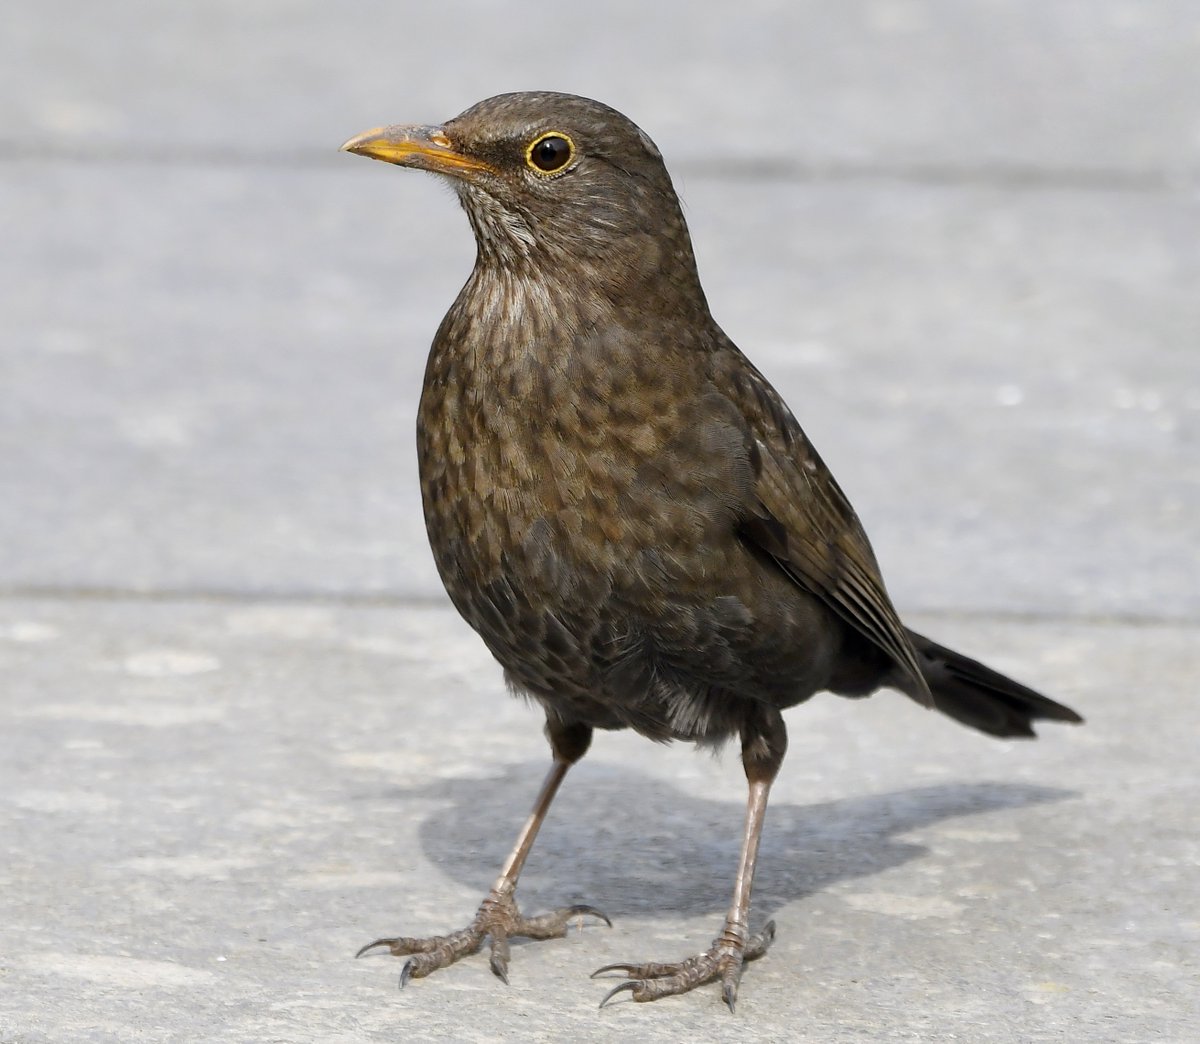 Blackbird. Male is a handsome black bird (hence the name!)Female is a mottled brown.The male has a beautiful song. Common in gardens, especially ones with lawns.  #SelfIsolationBirdWatch 